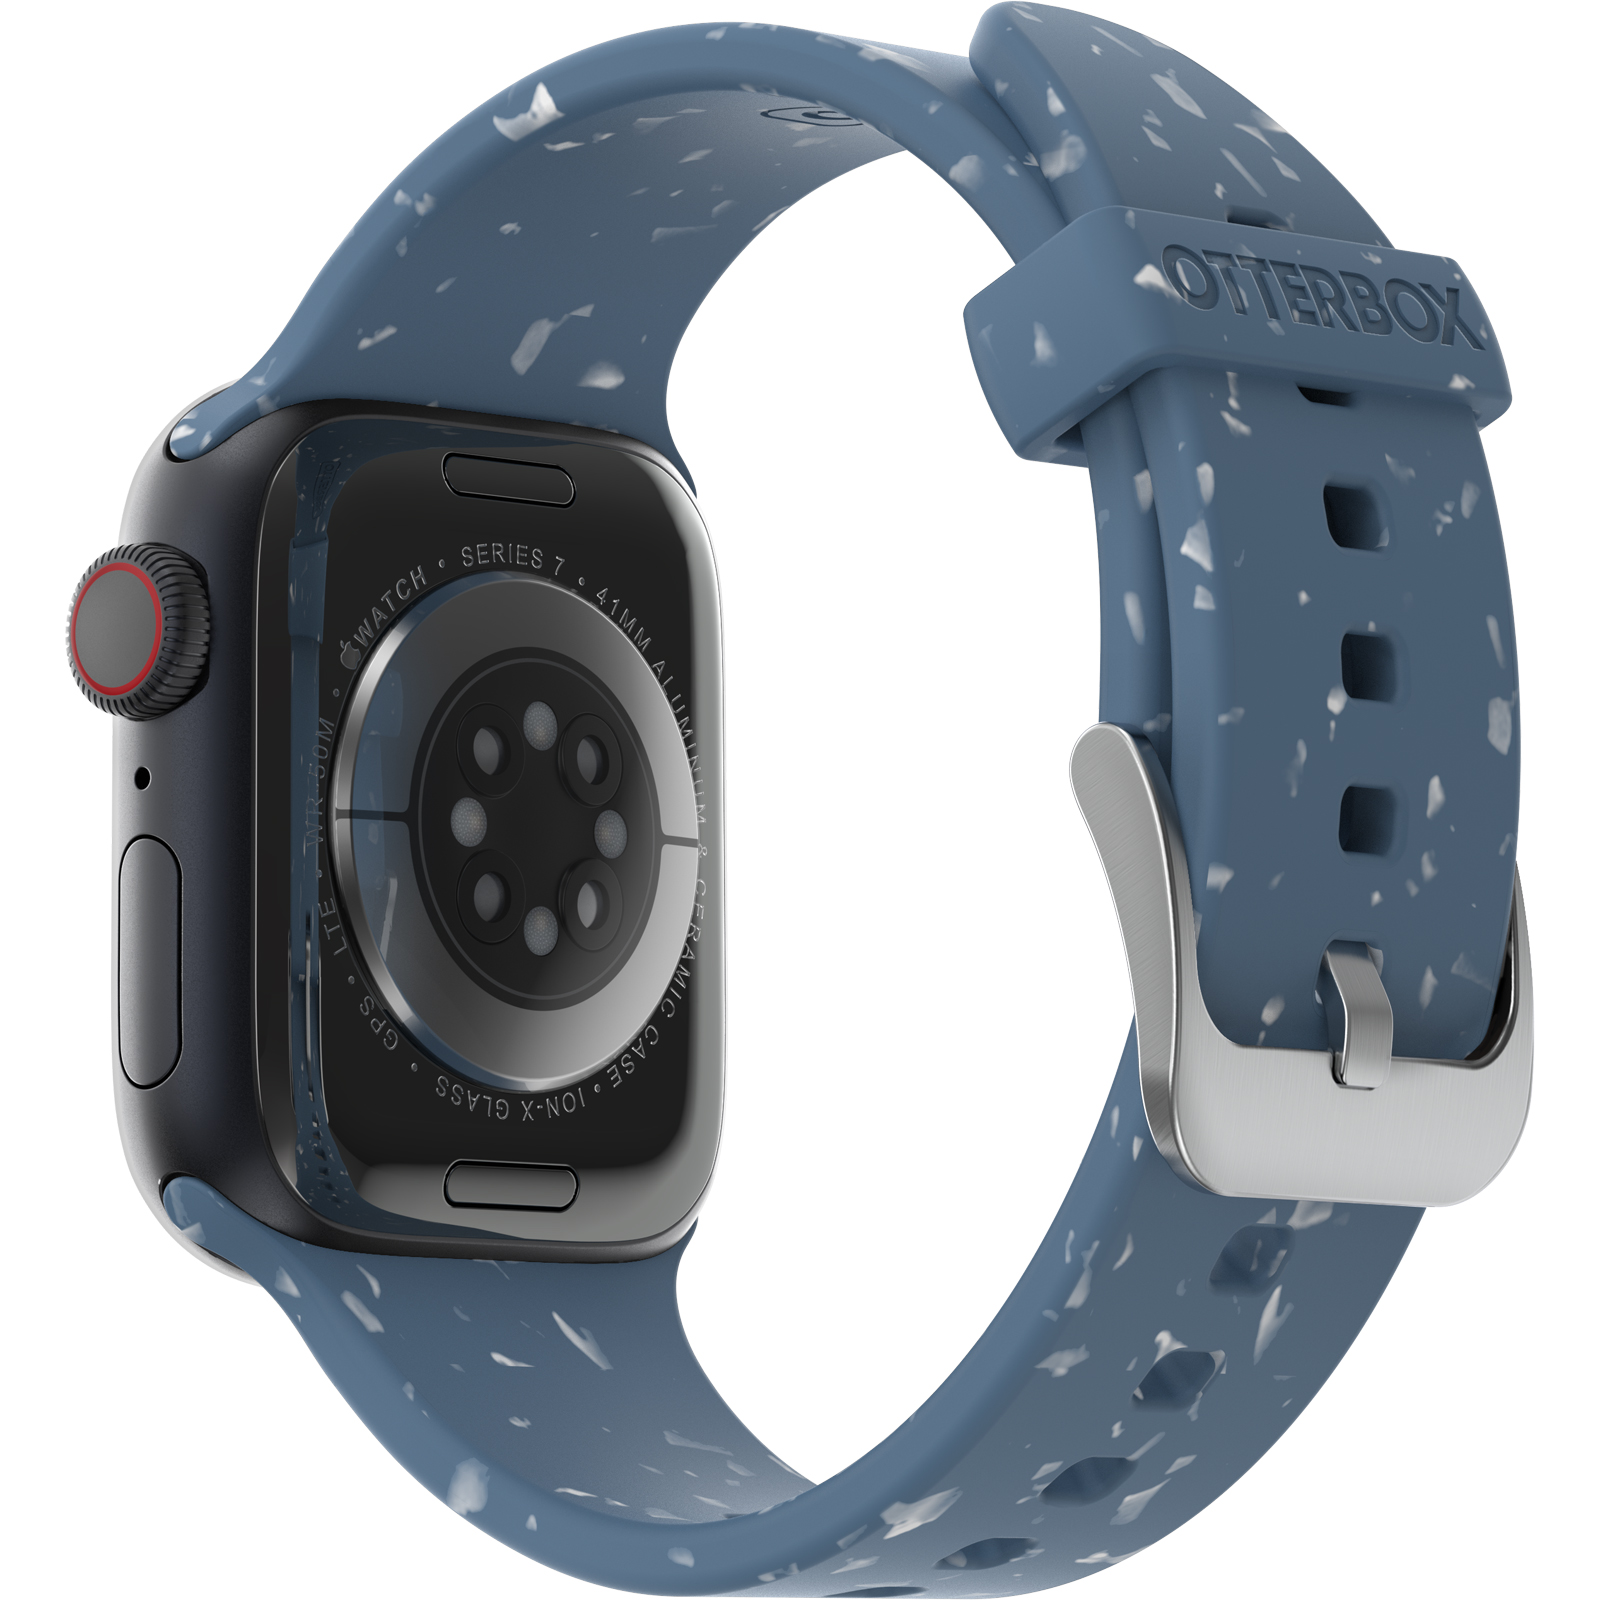 Blue Apple Watch wristband that leaves less for the landfill